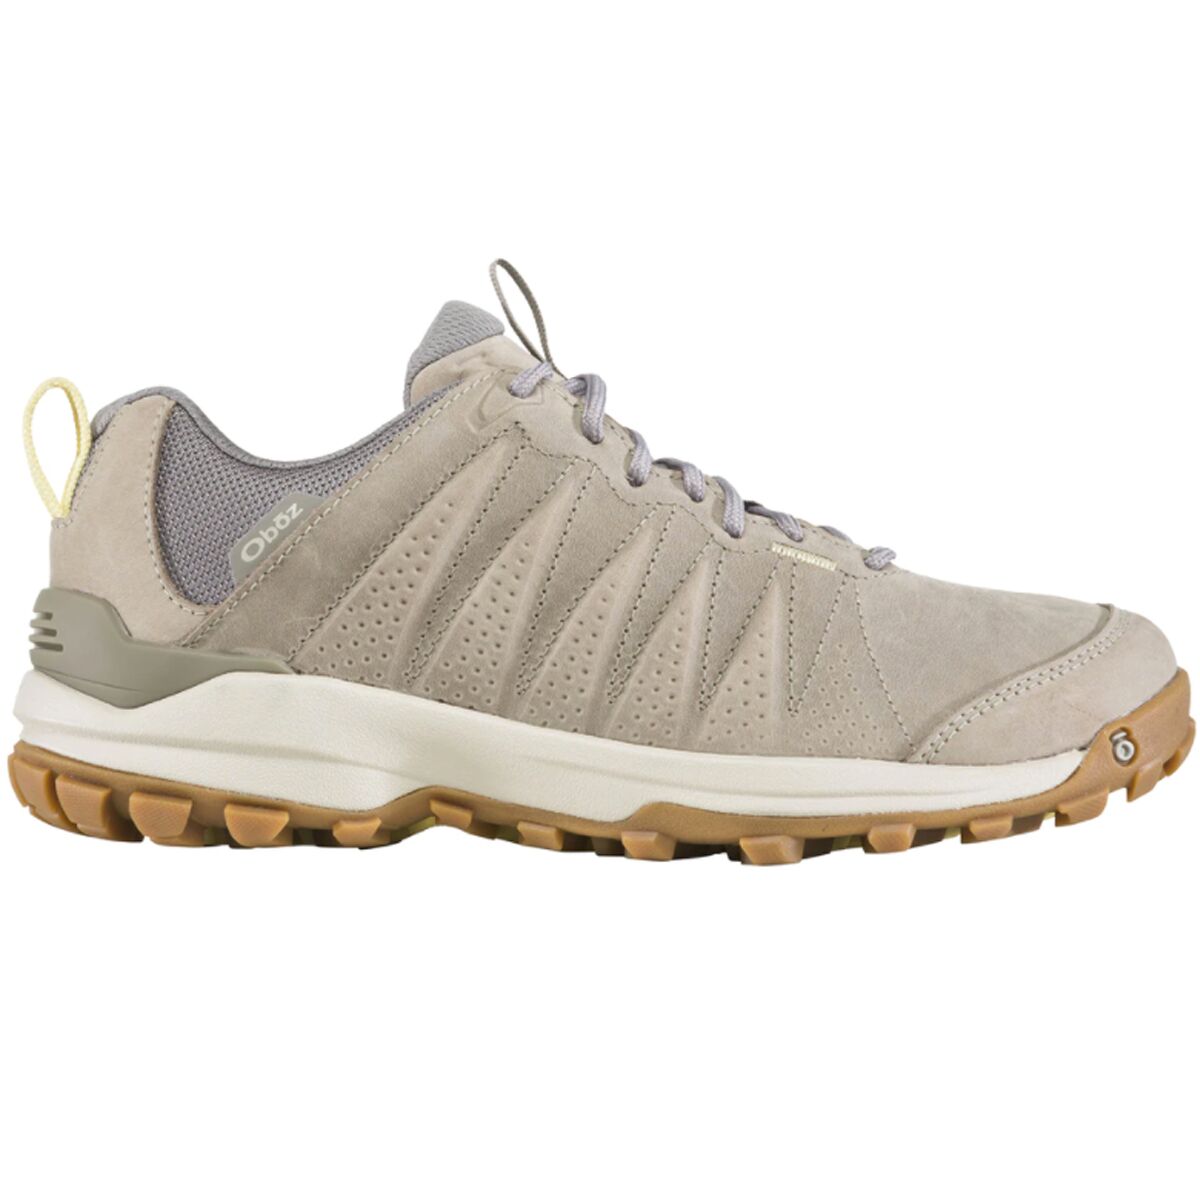 Oboz Sypes Low Leather B-DRY Hiking Shoe - Women's